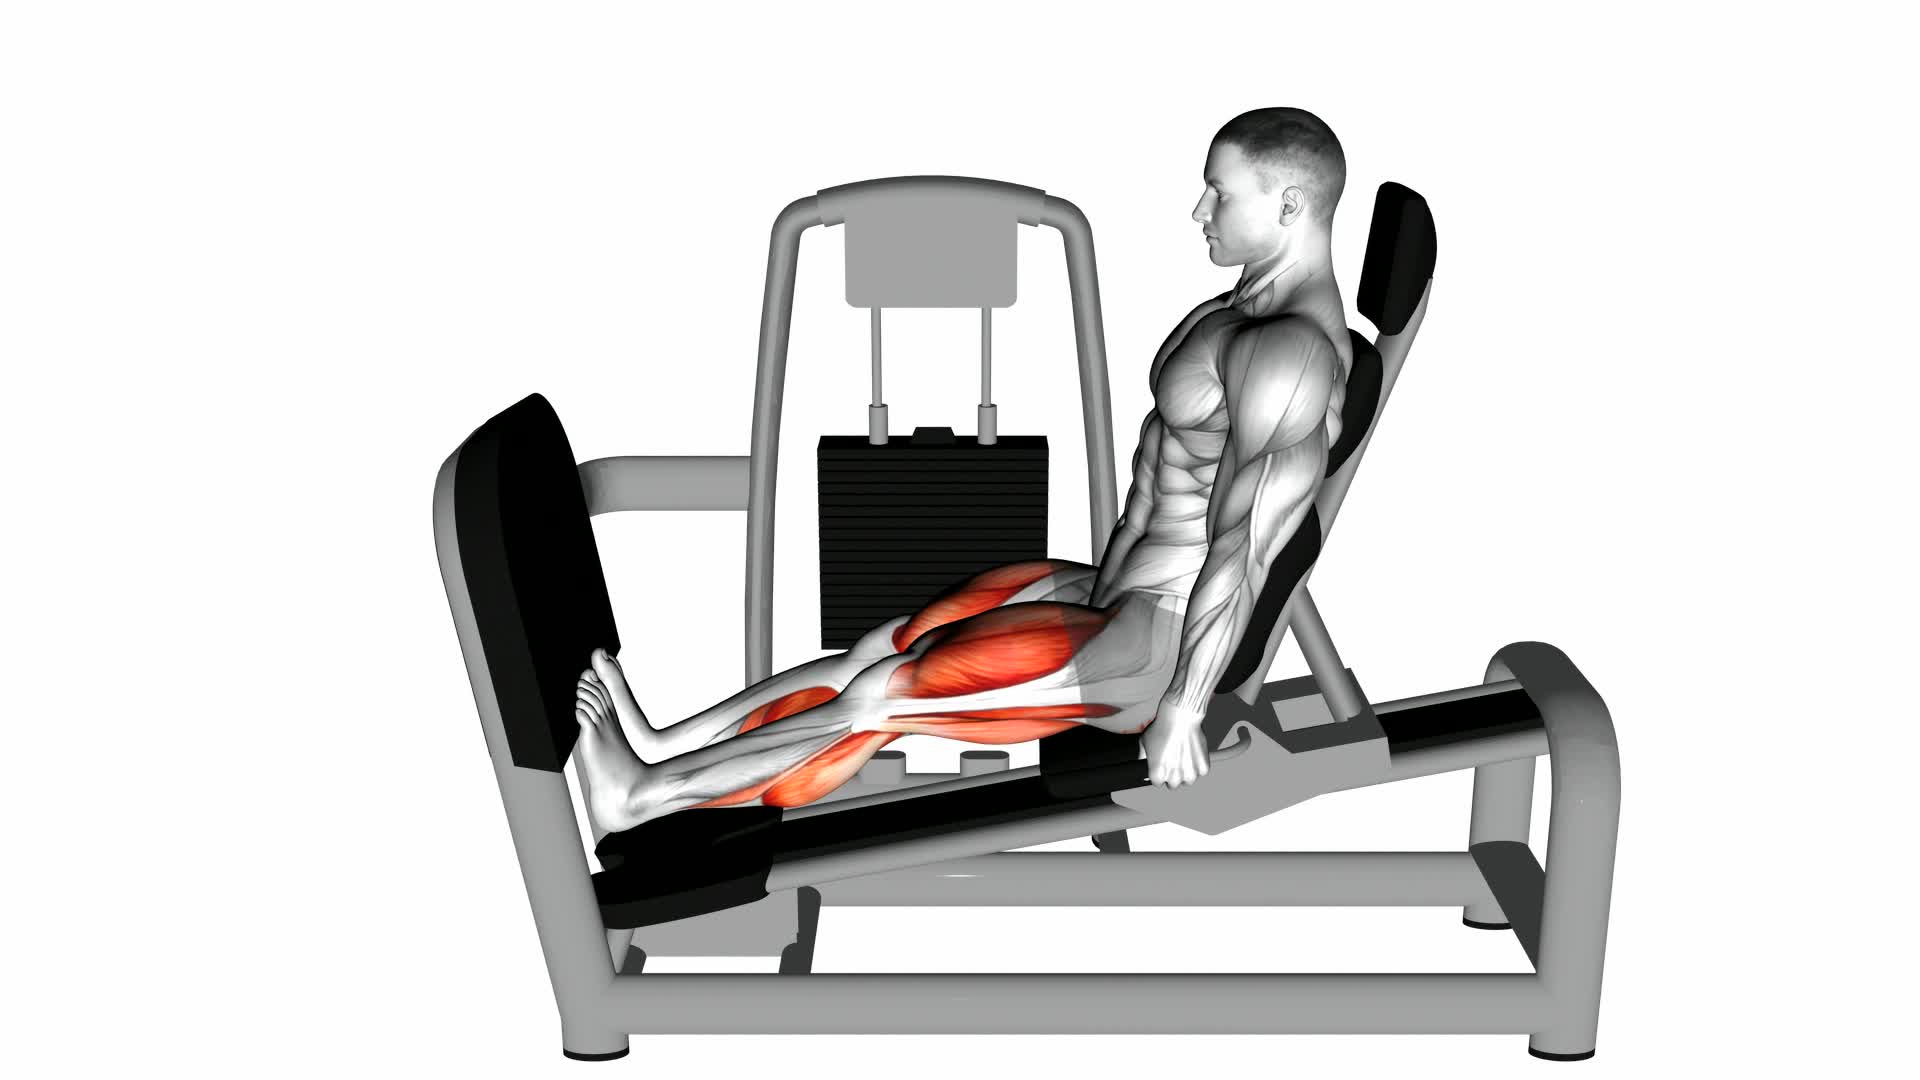 Lever Seated Squat Calf Raise on Leg Press Machine - Video Exercise Guide & Tips